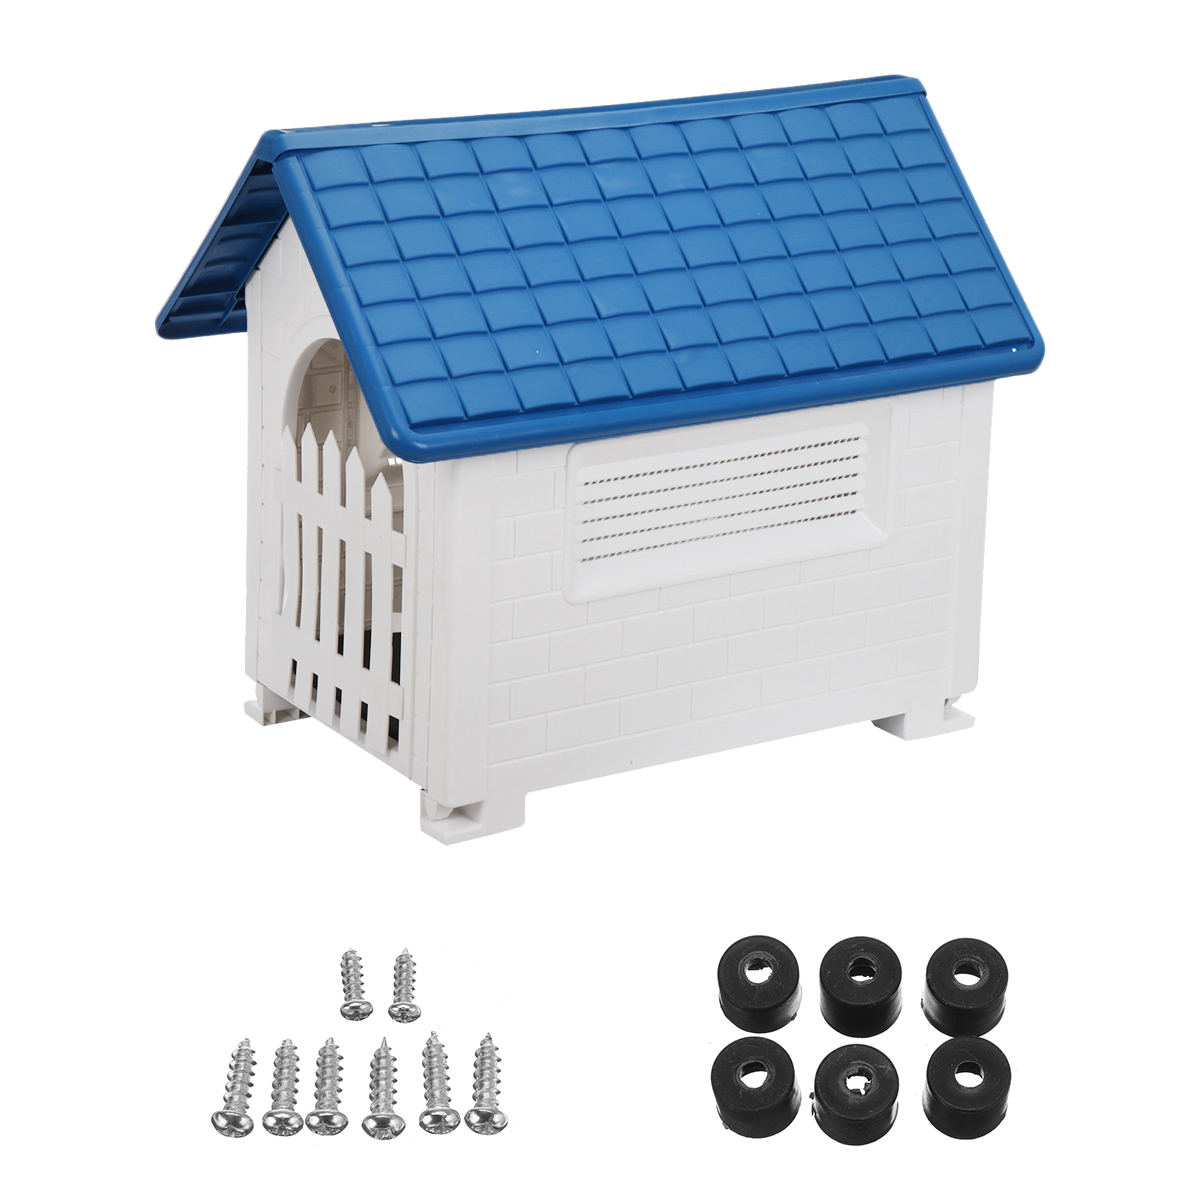 Foldable-Plastic-Pets-Dogs-Houses-Cages-Small-Outdoors-Waterproof-Warm-Removable-Washable-With-Kenne-1849921-7